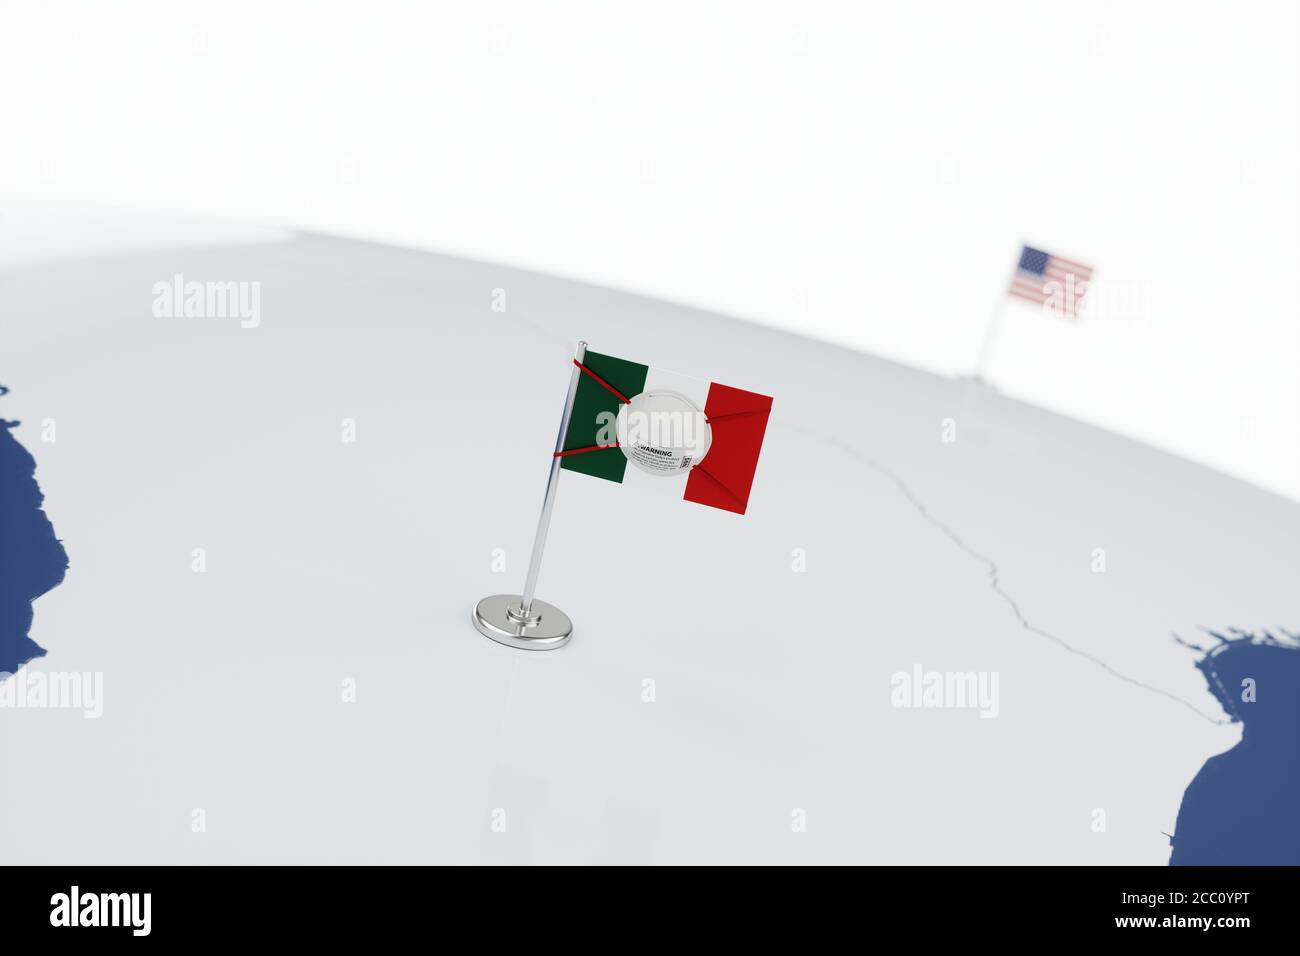 Coronavirus medical surgical face mask on the Mexican national flag. Illness, pandemic, virus covid-19 in Mexico, concept 3d rendering illustration Stock Photo